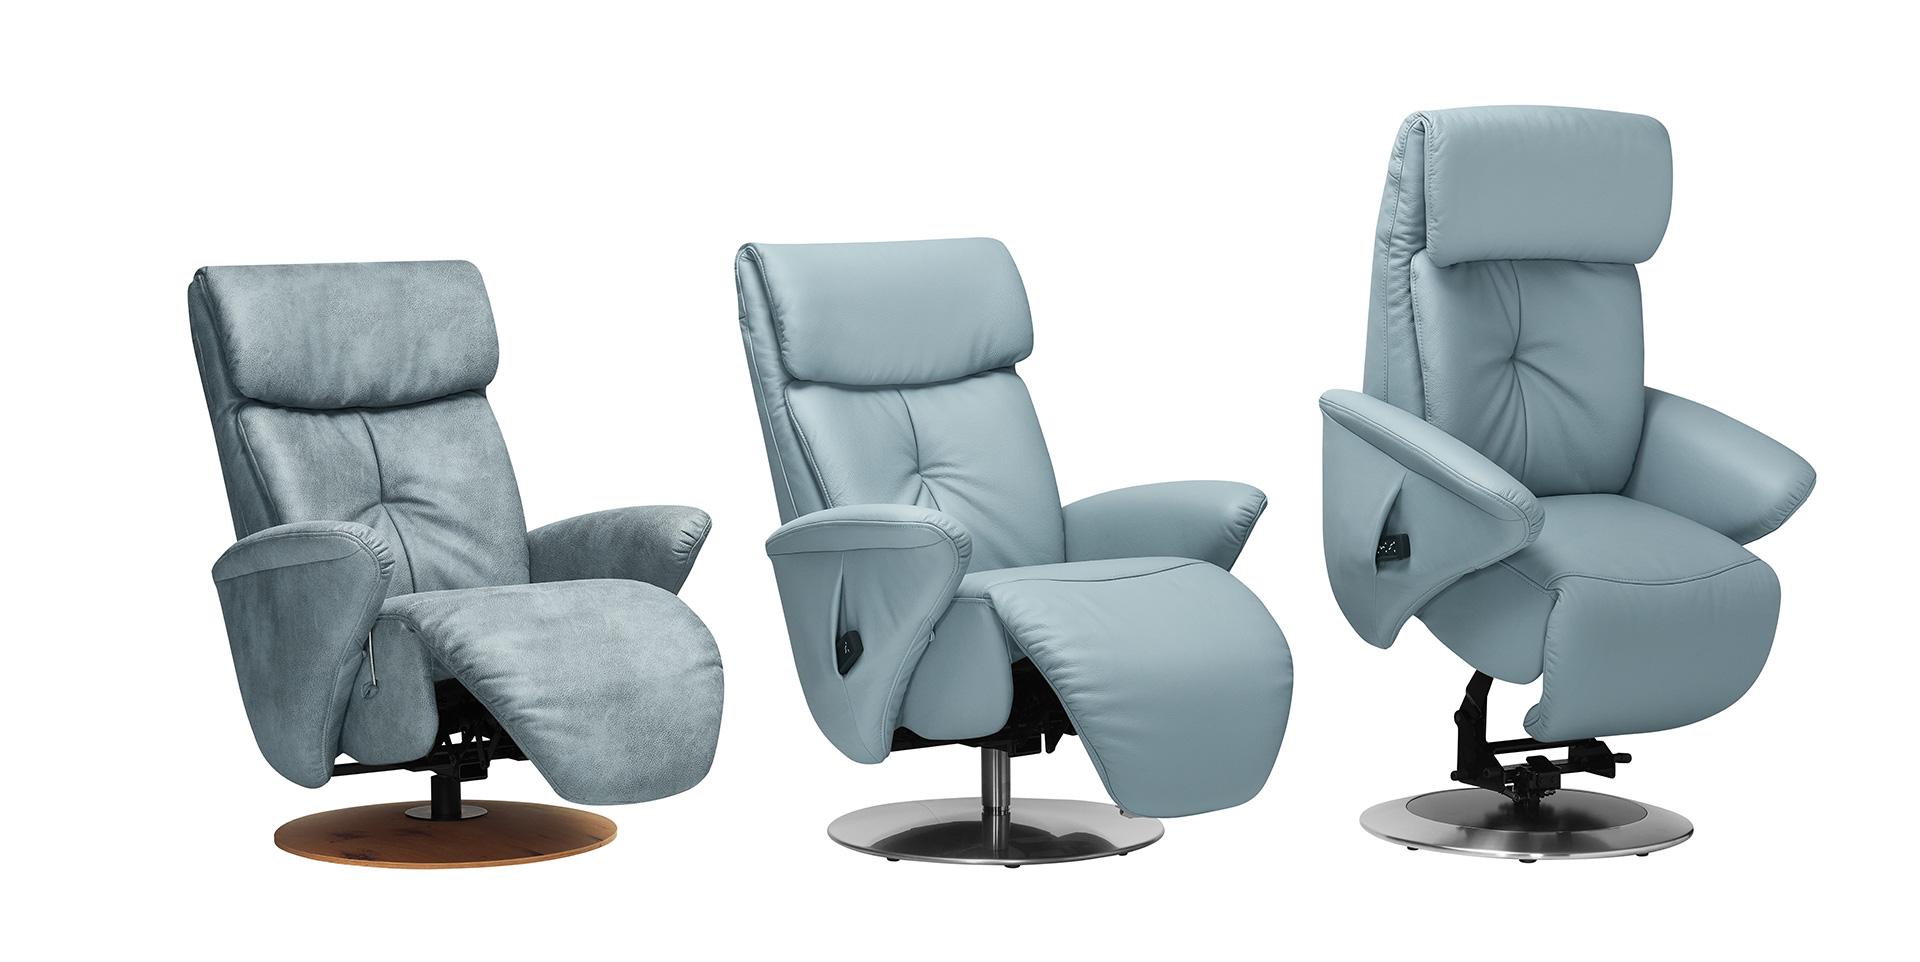 Slider Fauteuil relaxation 7341 (image 1)